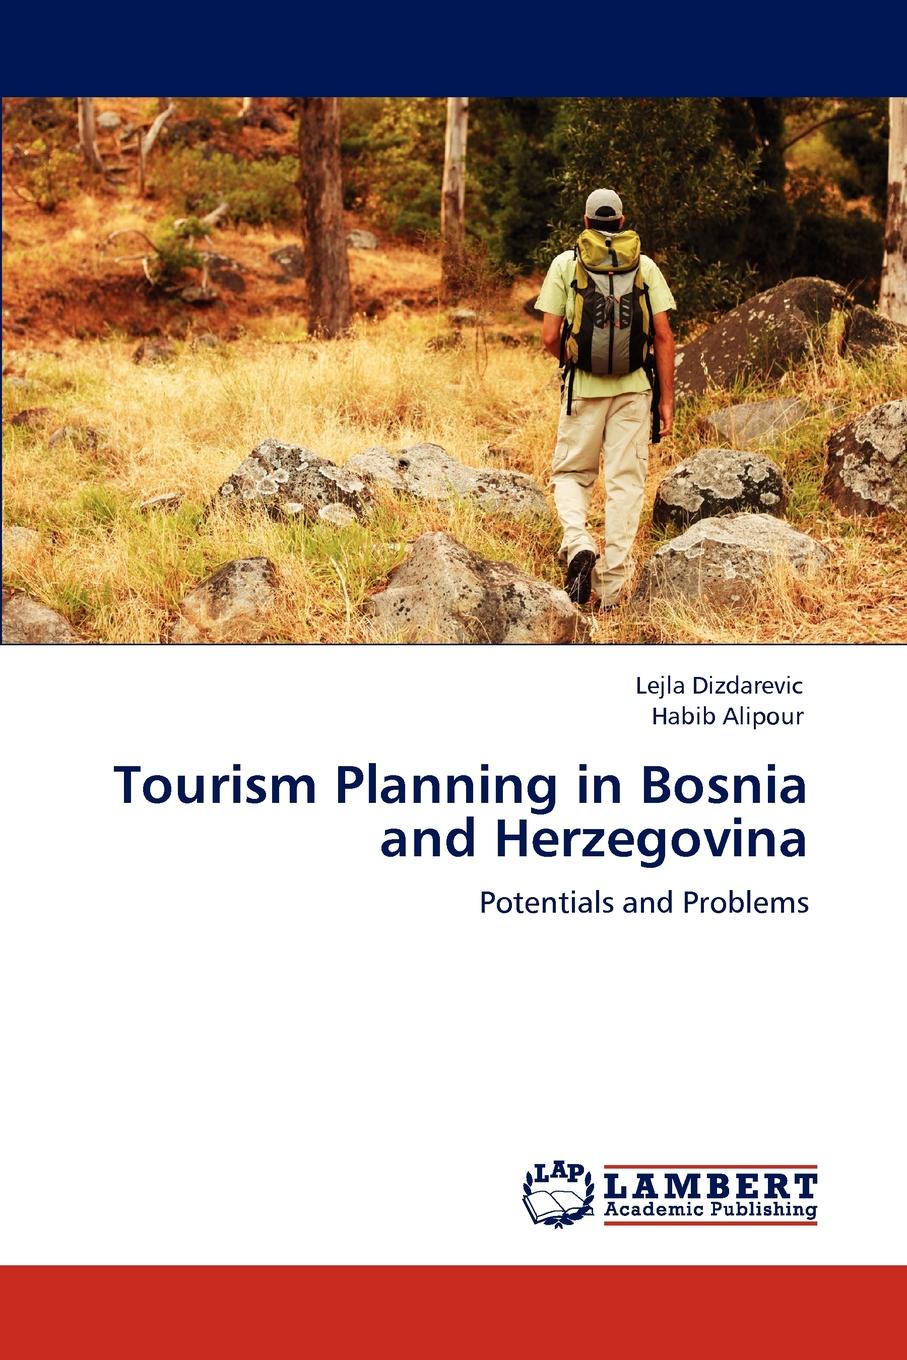 Tourism Planning in Bosnia and Herzegovina